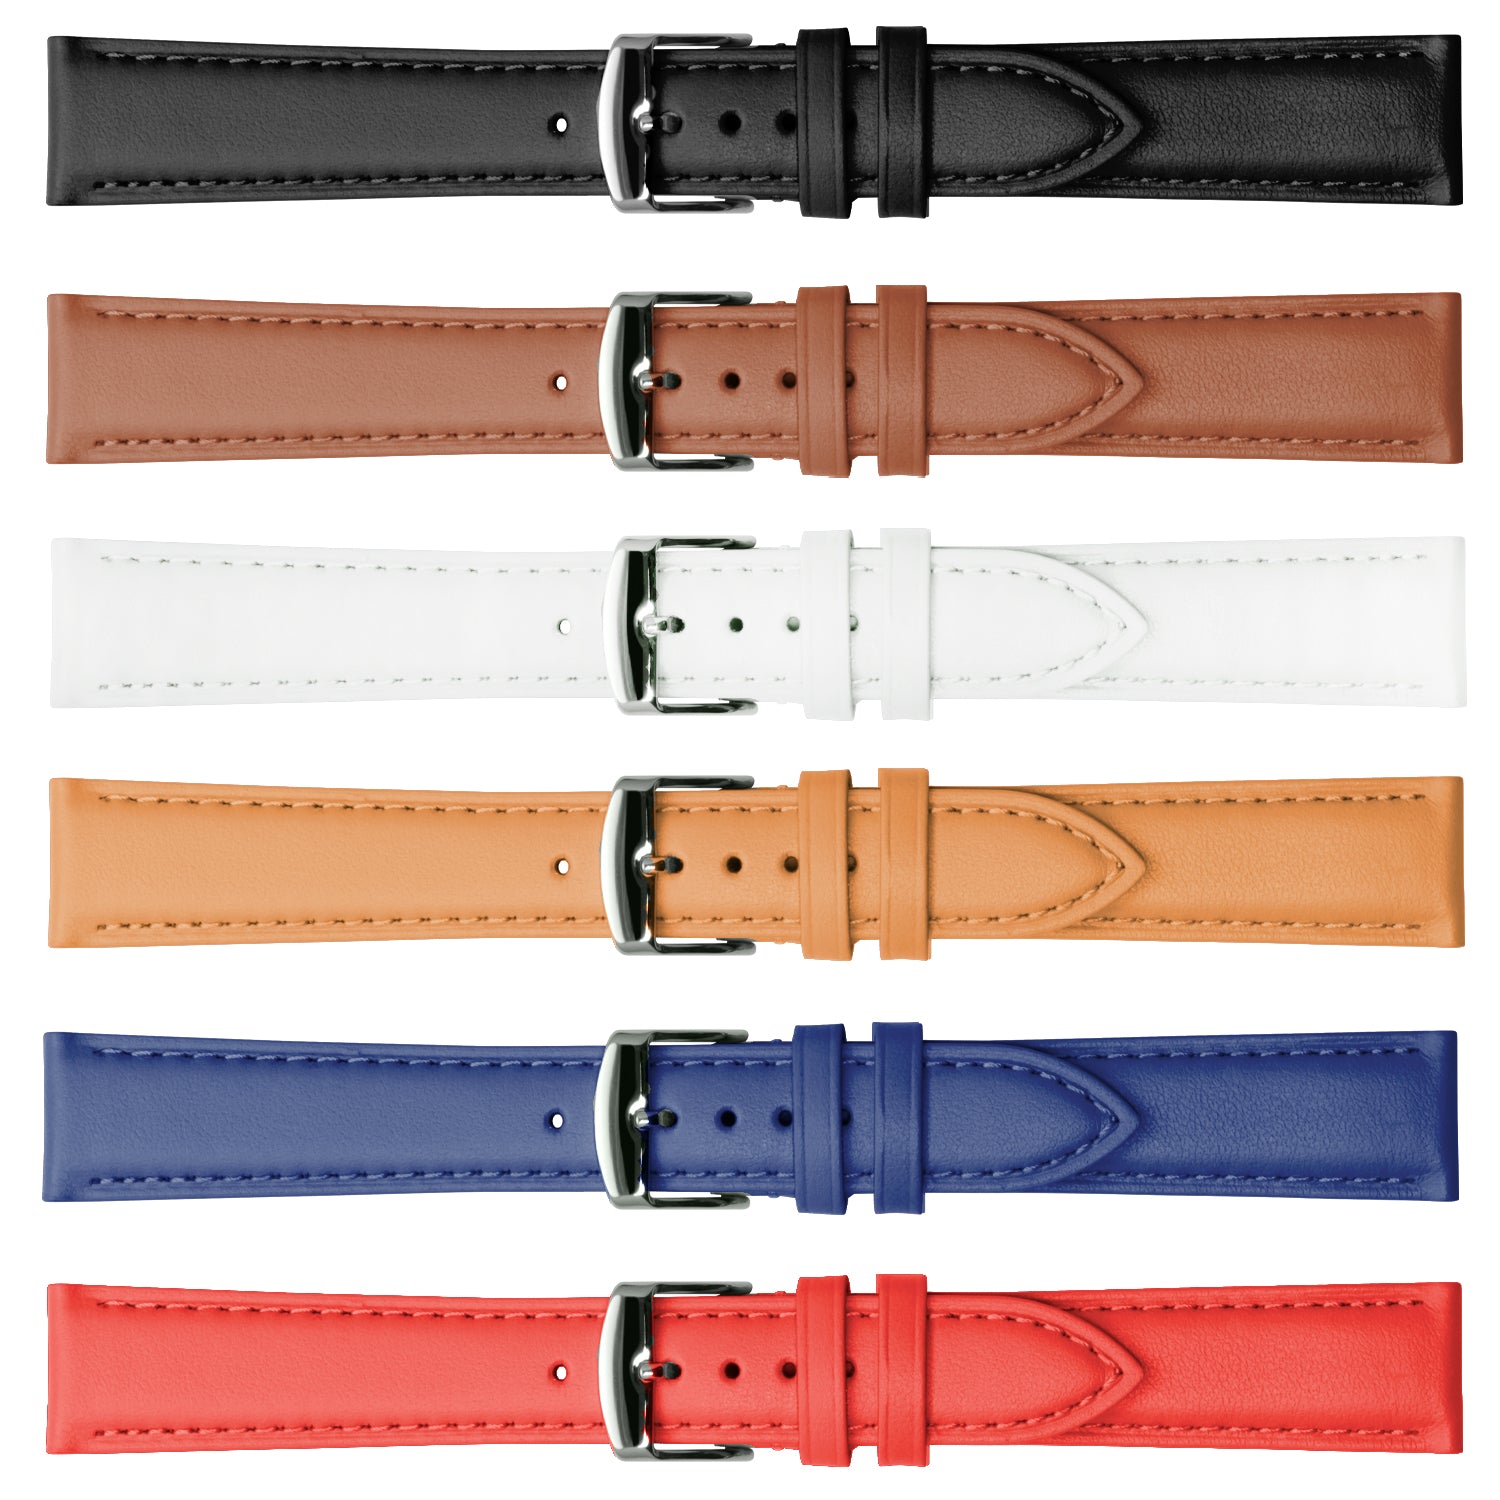 Leather straps for clothes rail - The No. 110 Natural –